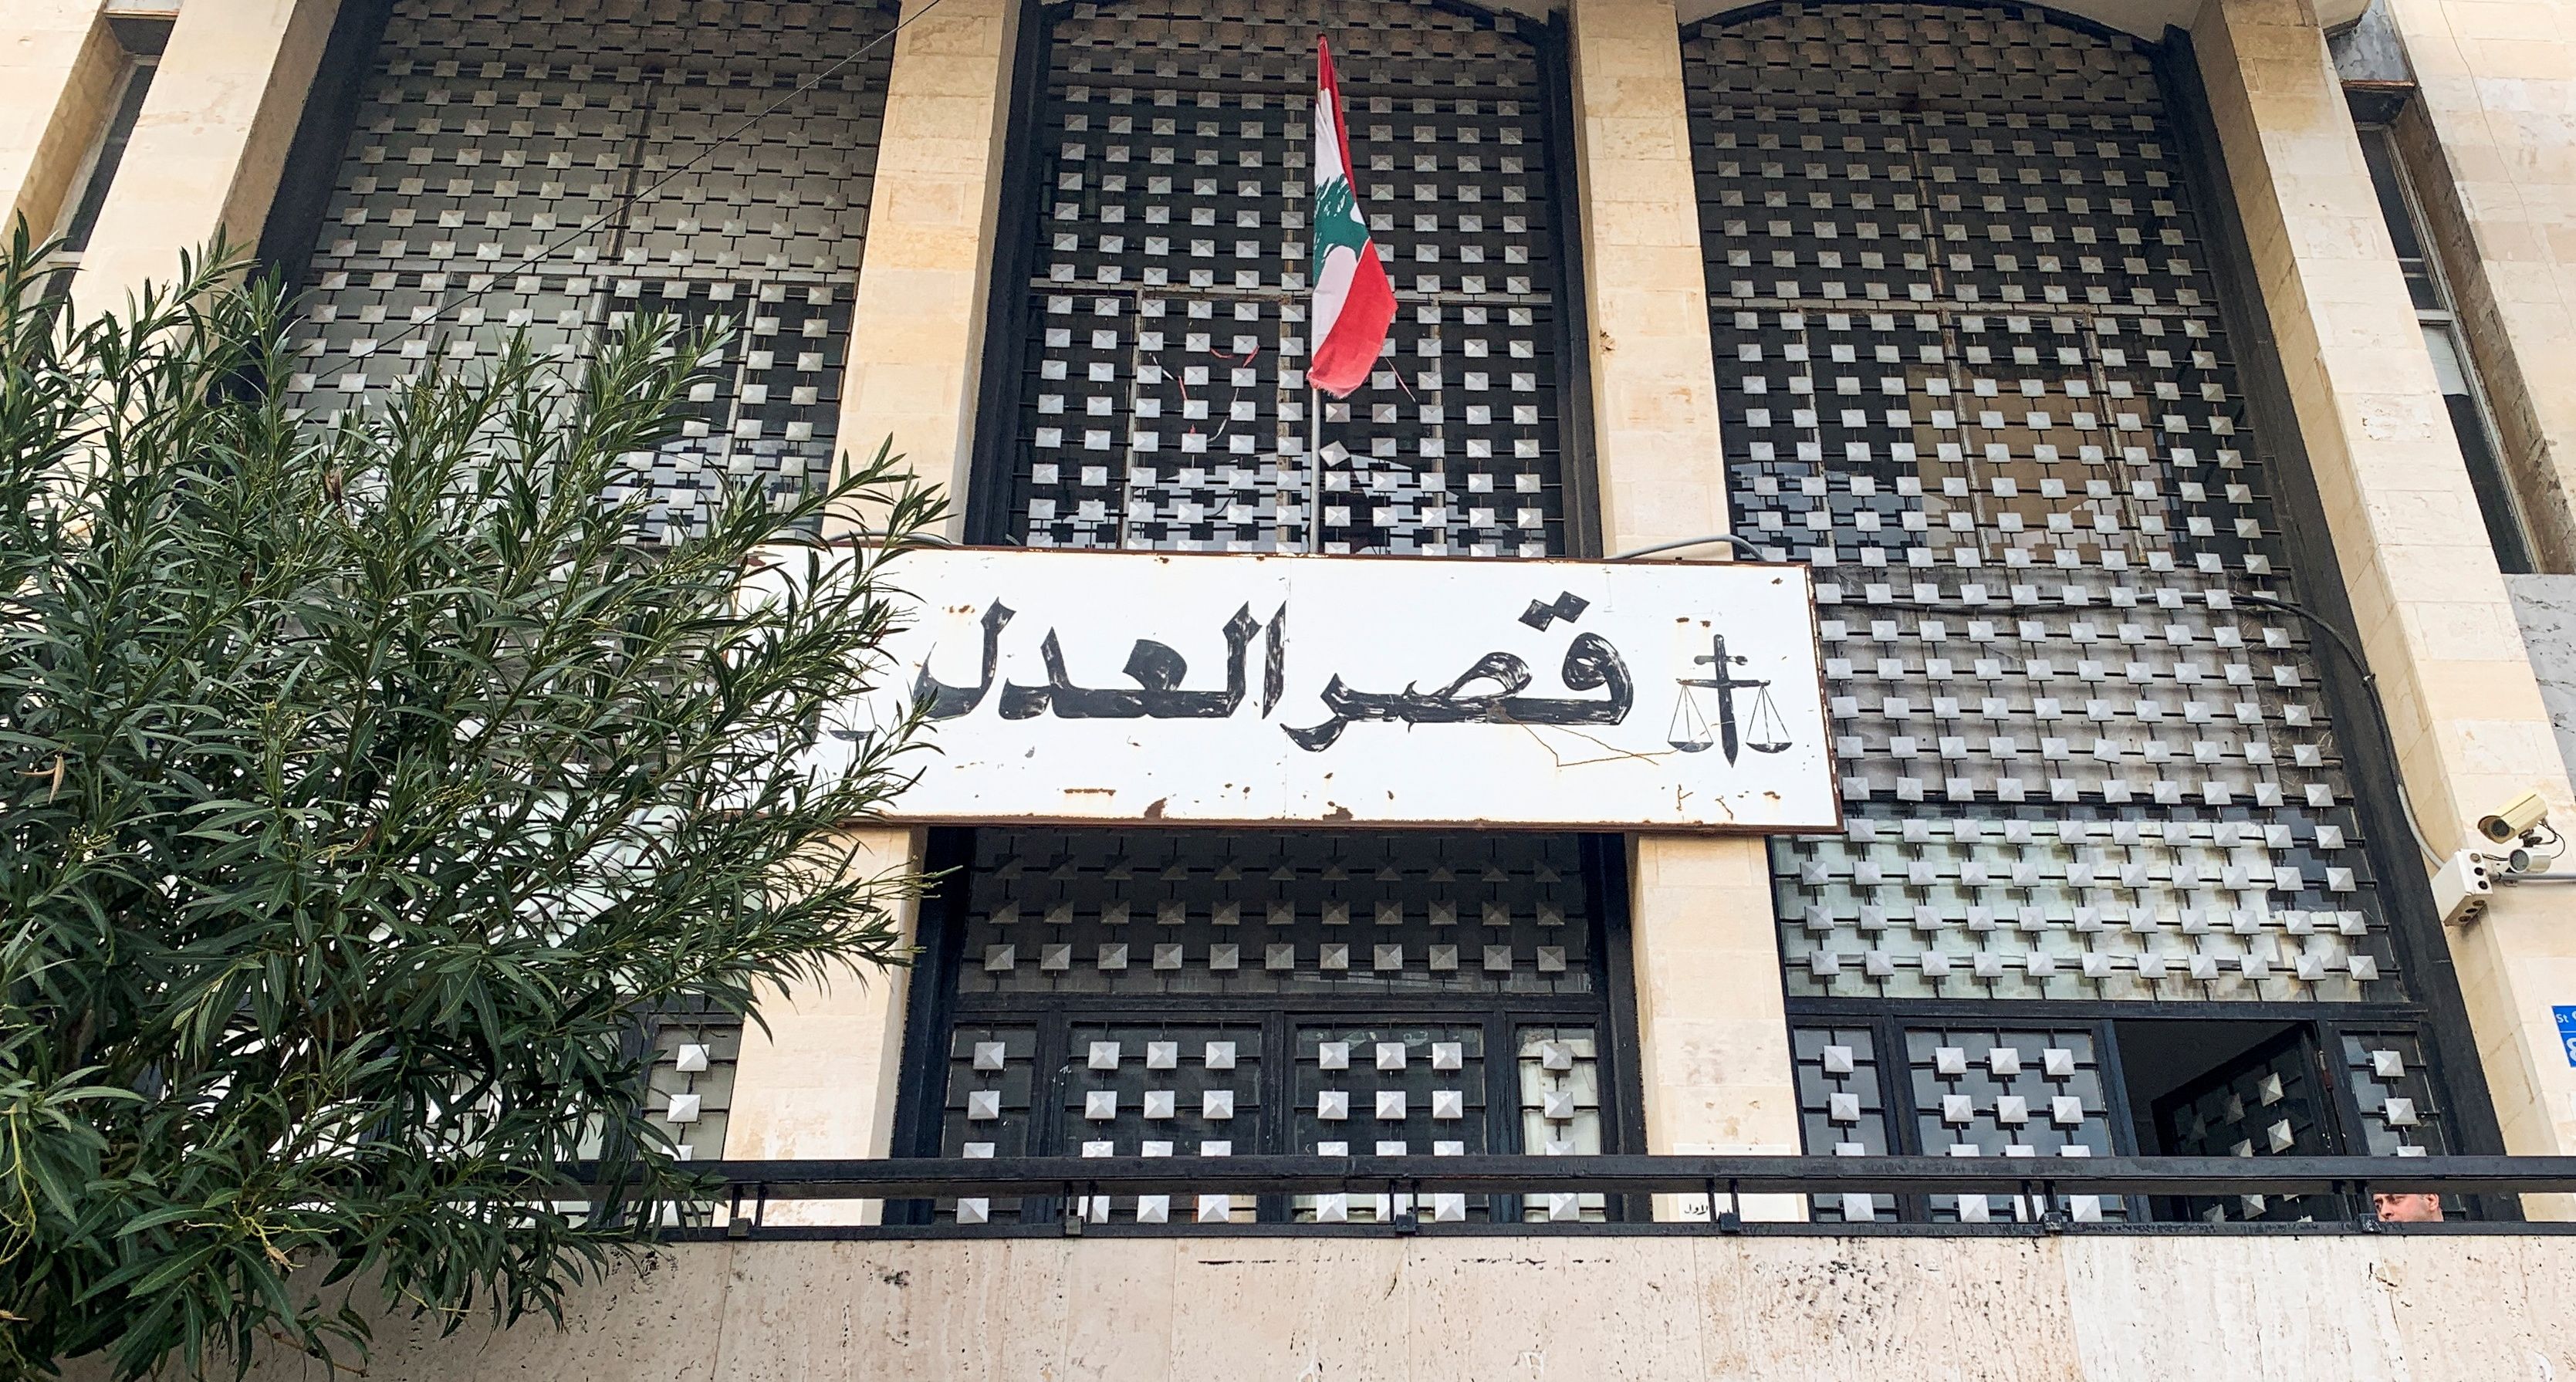 A view shows the exterior of the Justice Palace building where Raja Salameh, brother of central bank governor Riad Salameh is believed to have been arrested in Baabda, Lebanon March 17, 2022. (Reuters)